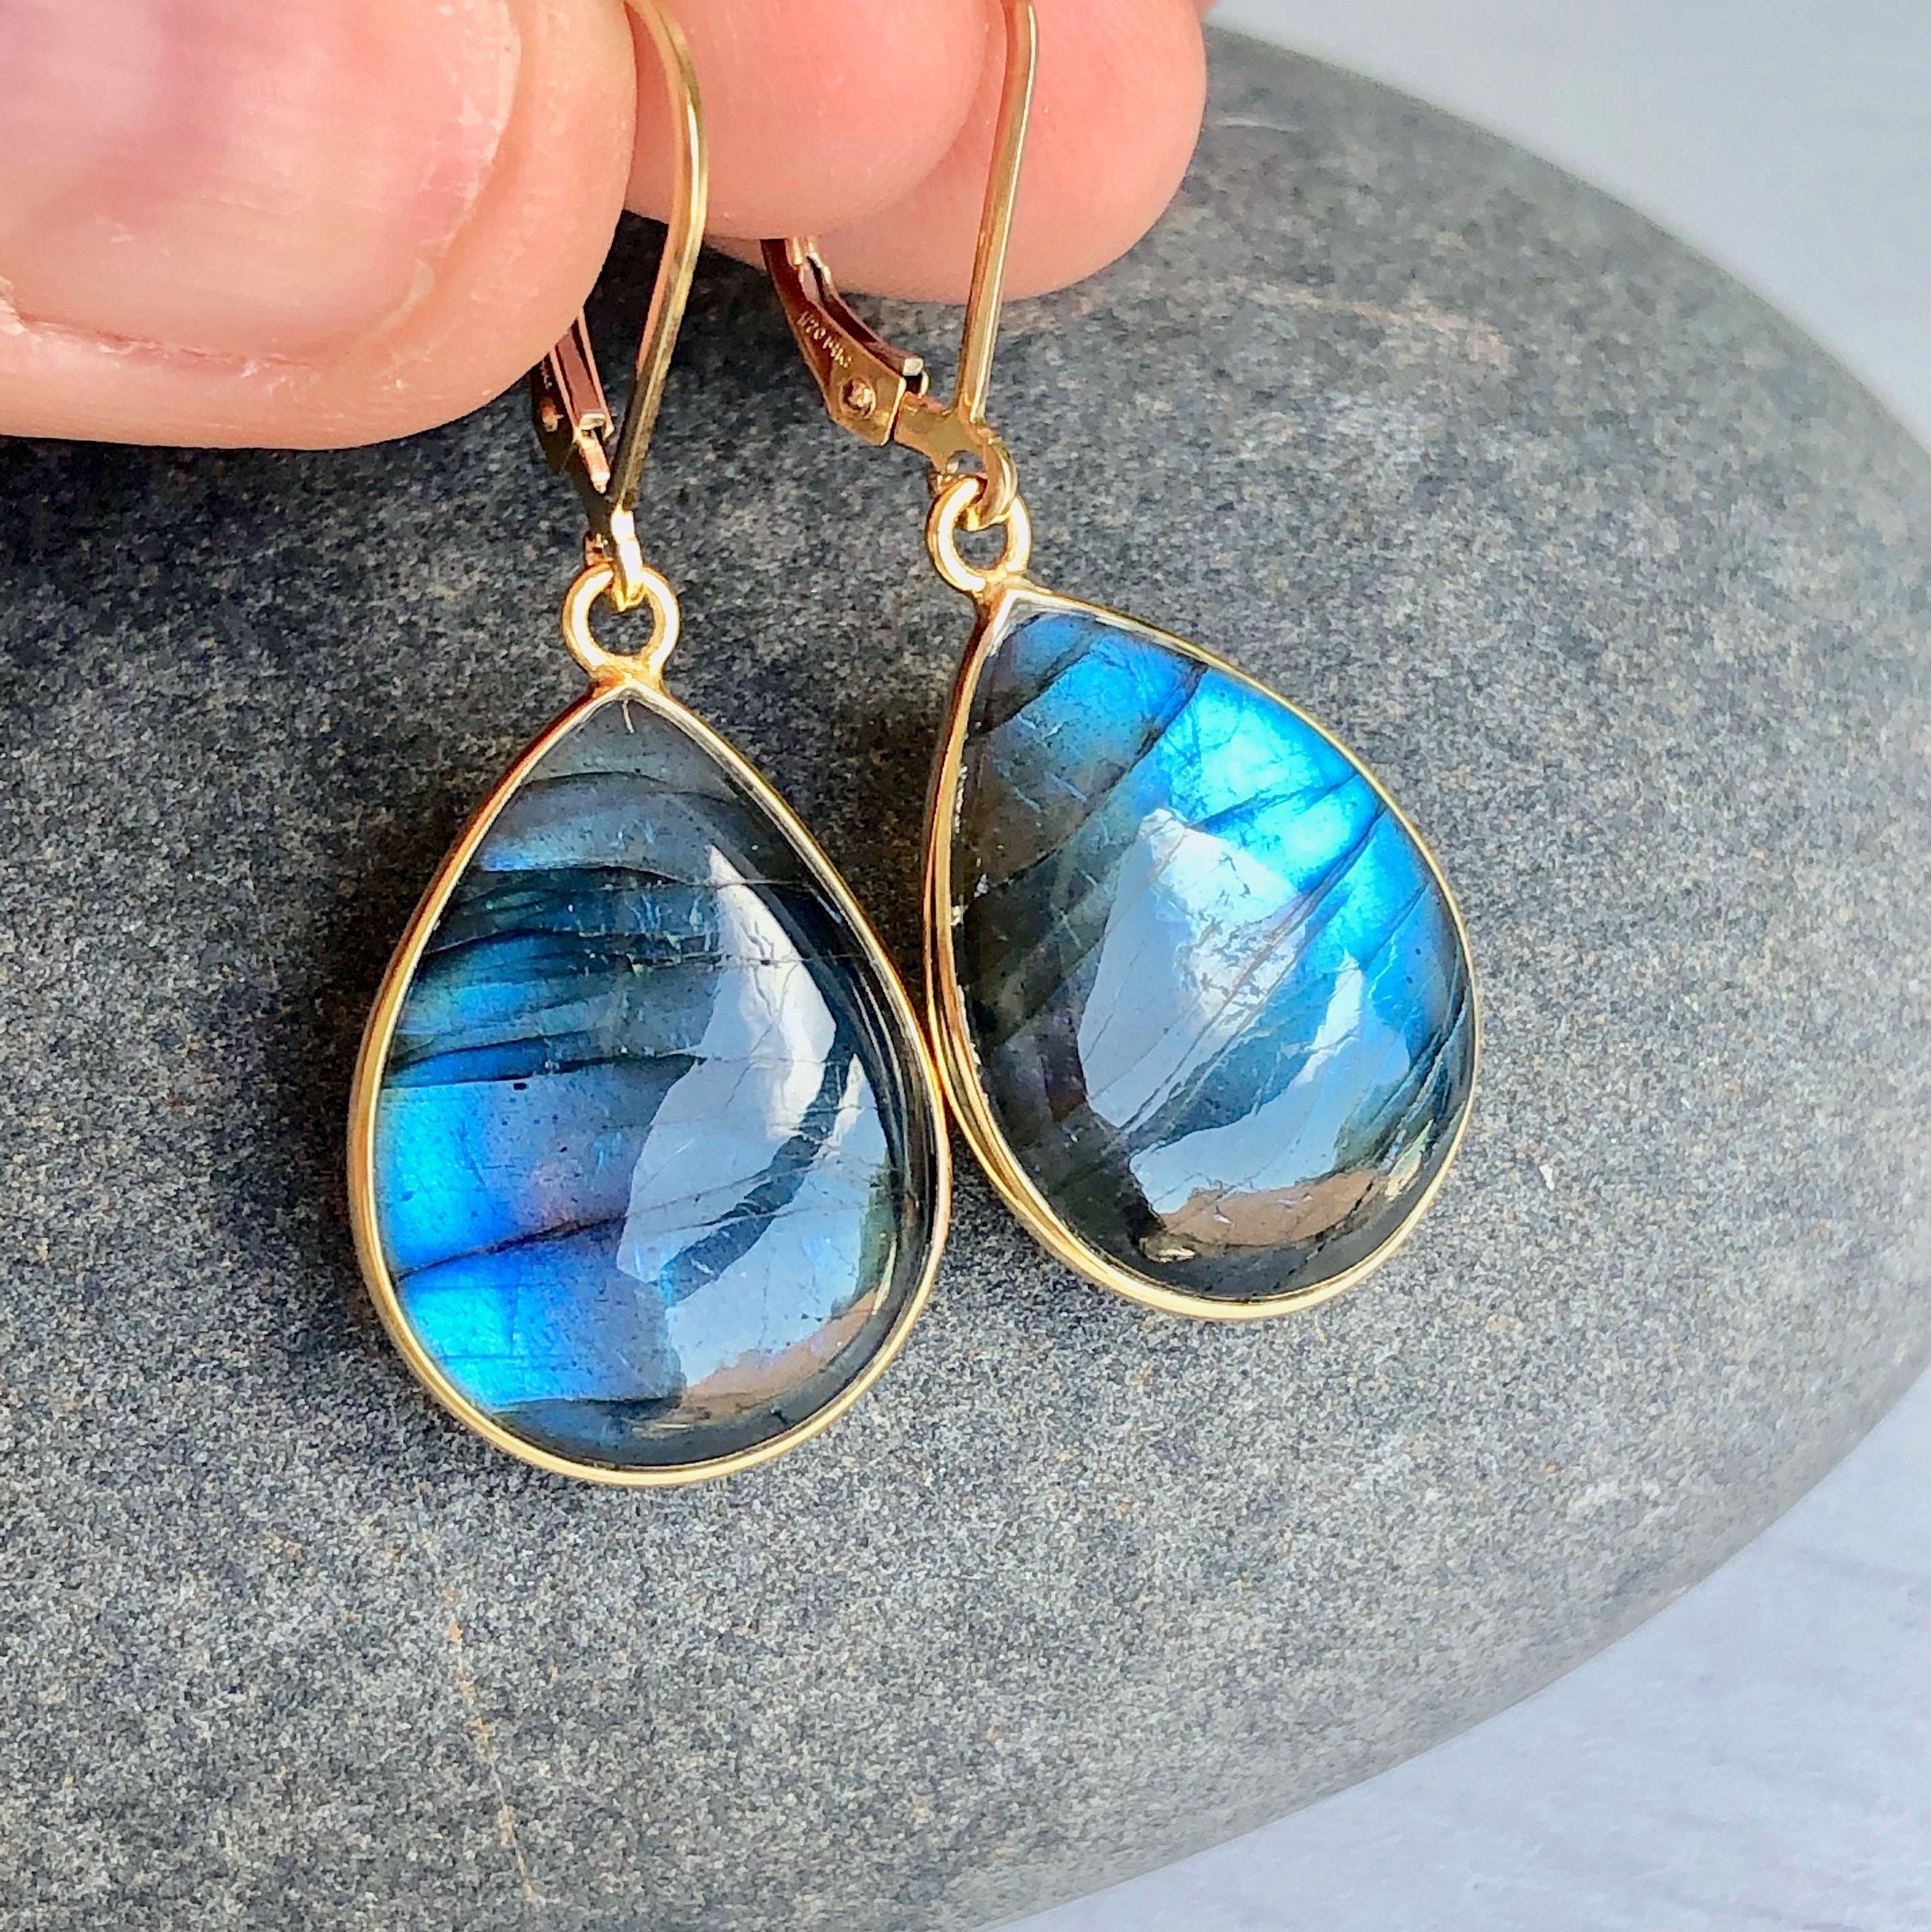 Gift for Her Everyday Earrings Silver Teardrop Earrings Blue Earrings Boho Blue Dangle Earrings Colorful Statement Earrings